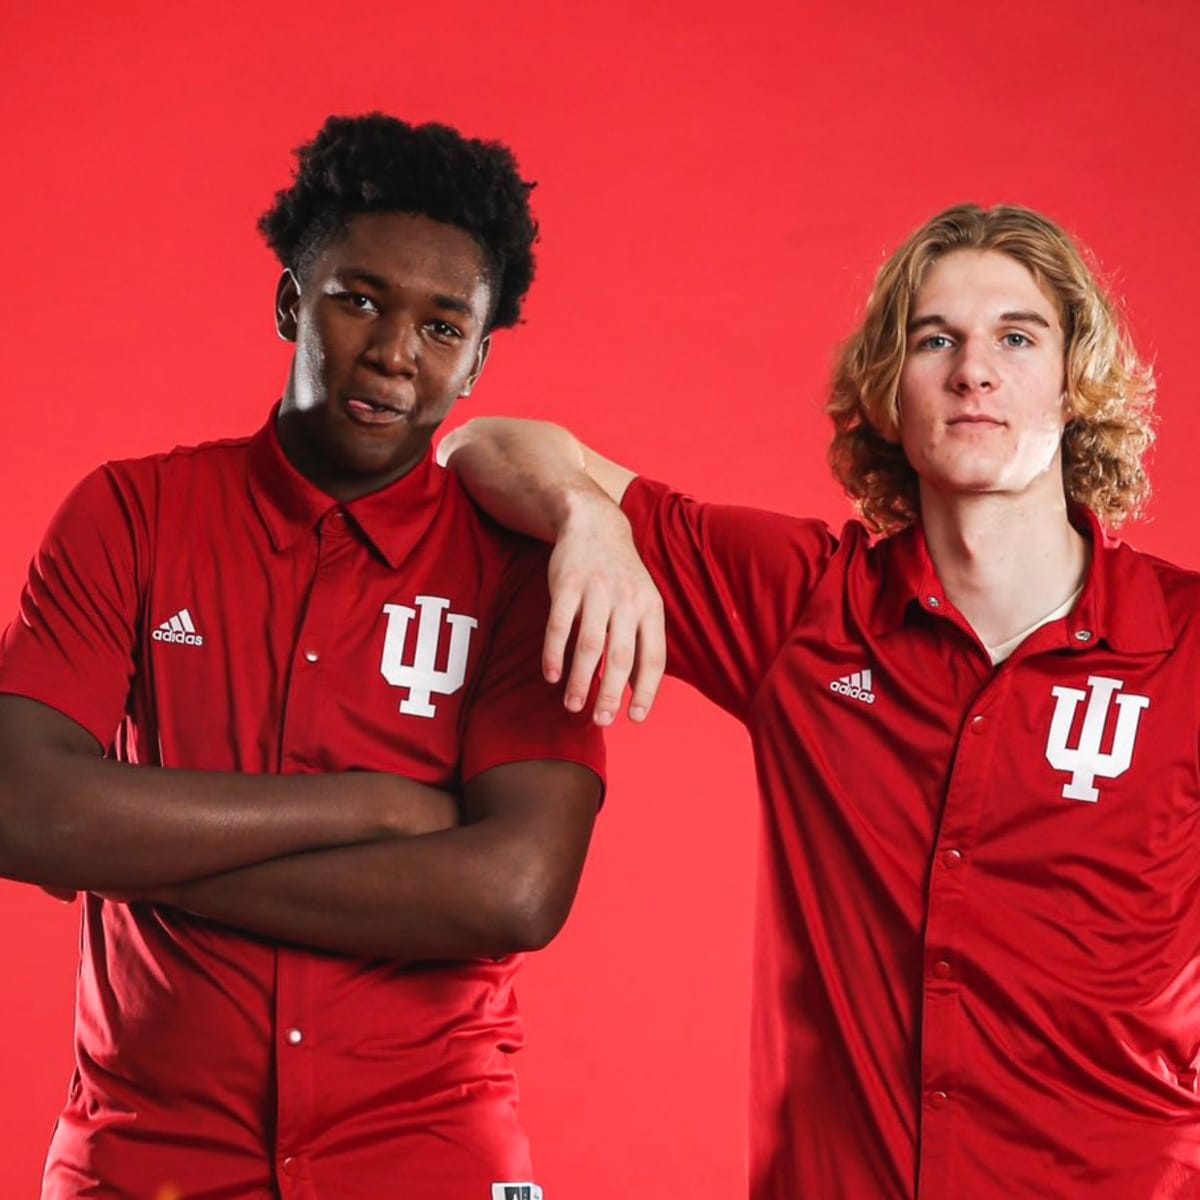 Hoosier Roundtable Podcast Previewing IU vs